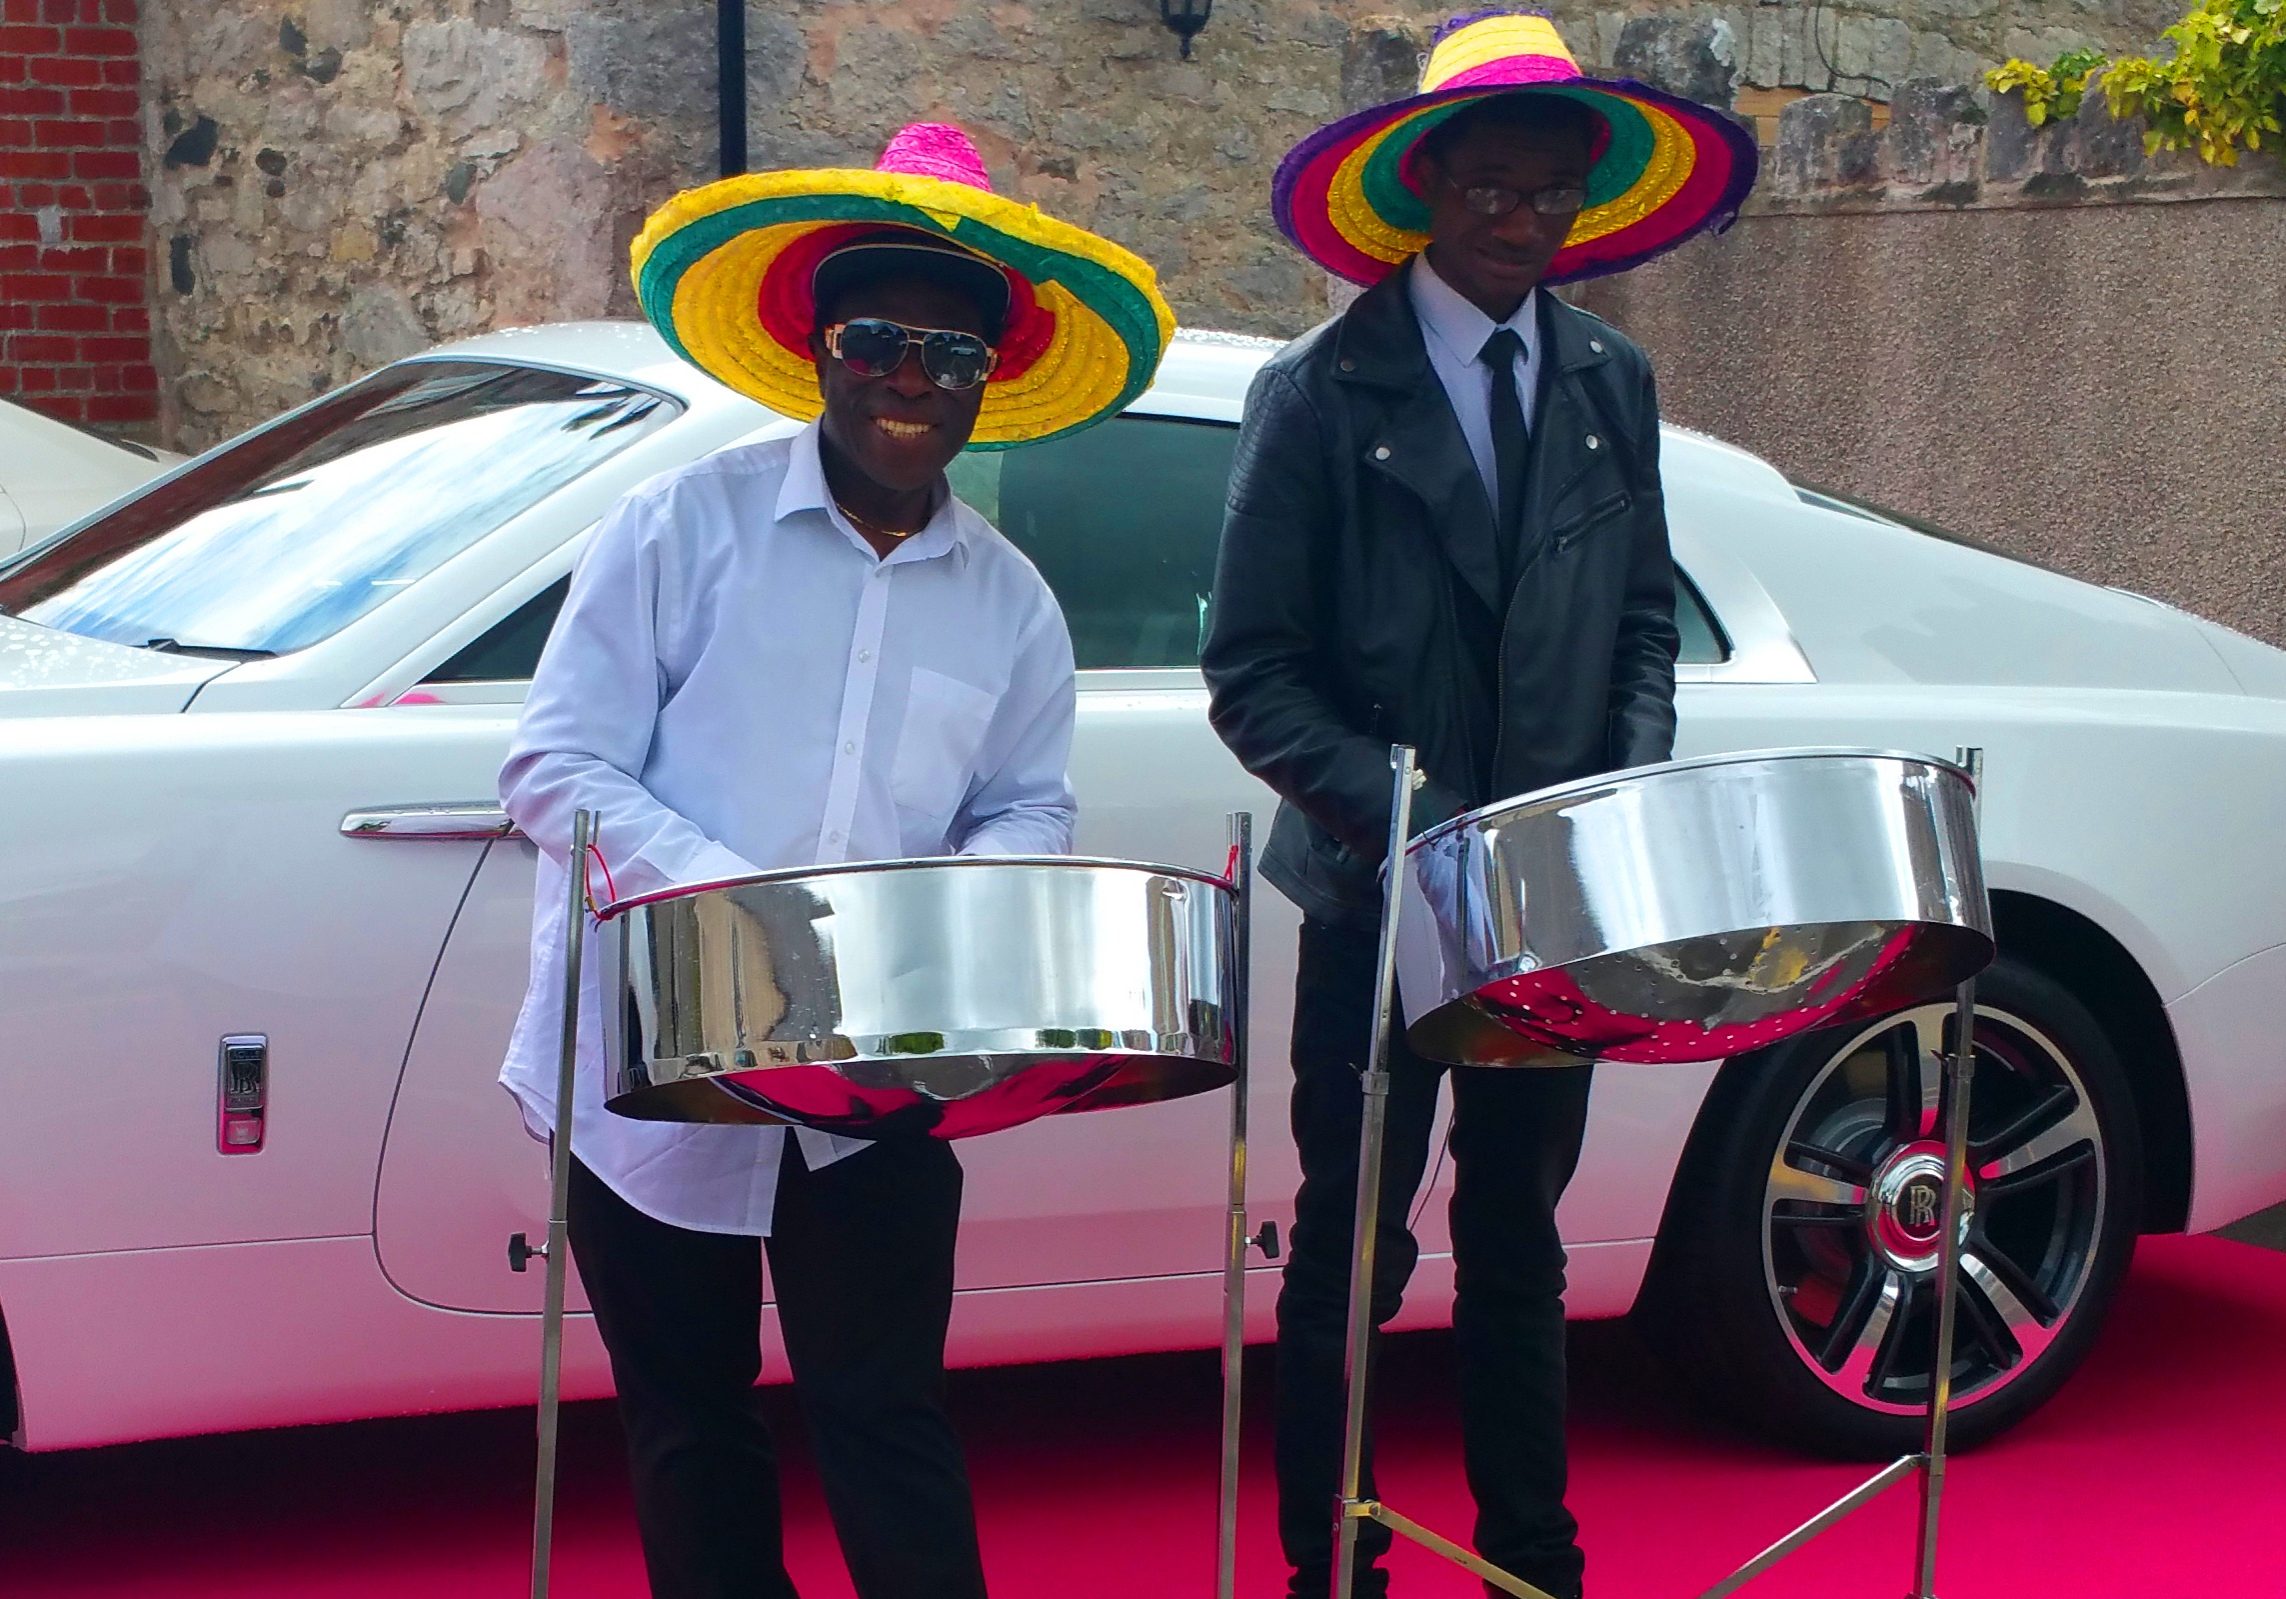 07944432649.CO.UK, We Are Steel Bands for Hire UK - Call Us Today To Discount steel drums bands Hire Professional Authentic Steel Band, Book and Hire bands for Celebration Party. Many Positive Happy Events reviews. We Helping Event Parties All Around The United Kingdom UK years of experience. Instant Help quote. Flexible, Choose The Band sizes, Choose The Consumes You Want us To Wear At Your Event. ‎Get a quote Now · ‎See performance videos, · ‎Corporate Team building Fun, Summer Parties, Christmas Parties, Weddings, Birthdays & Education Workshops We Make It Work Happily Call Now 07944432649